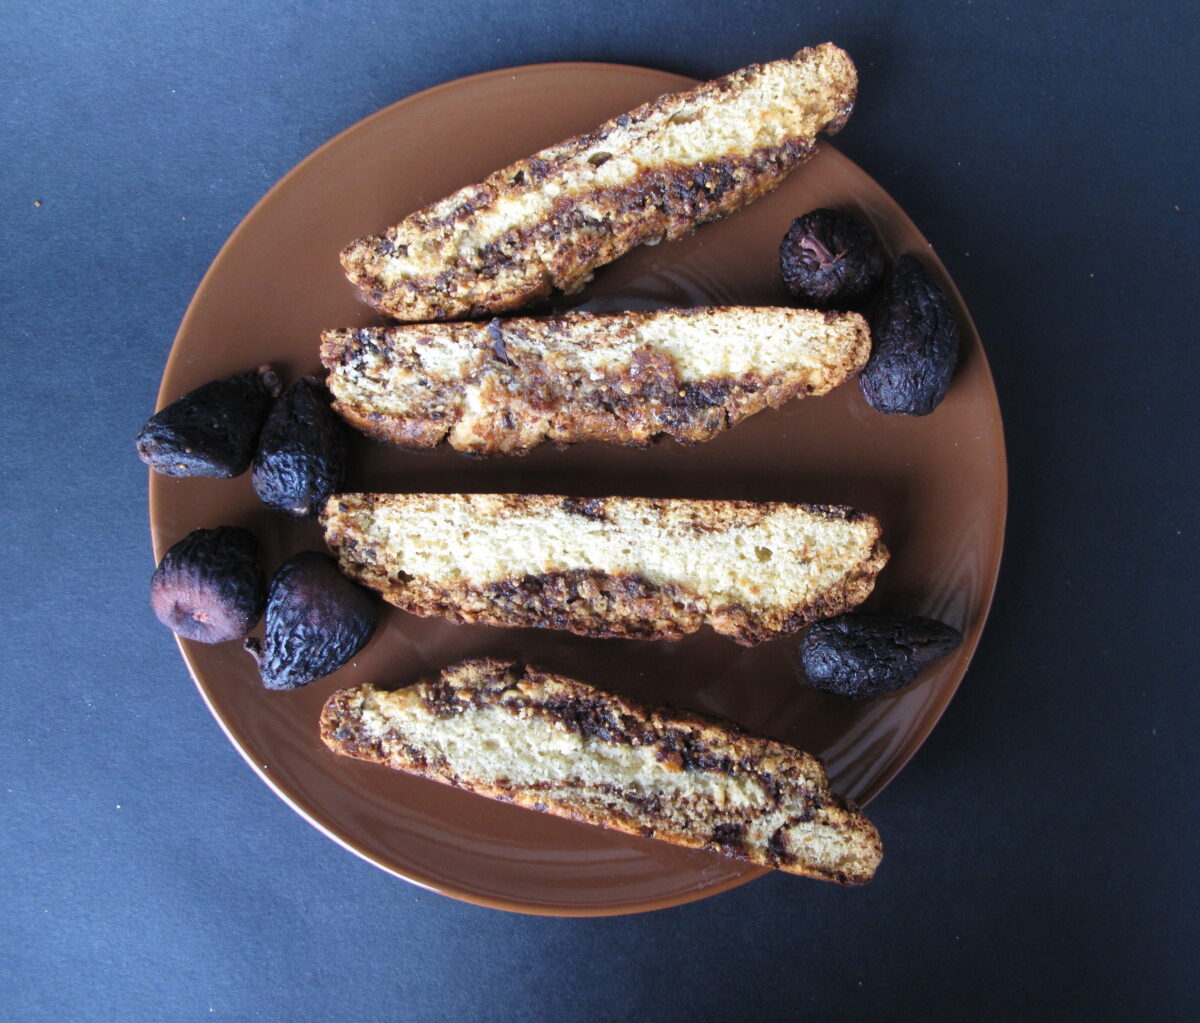 Biscotti and figs on a brown plate.